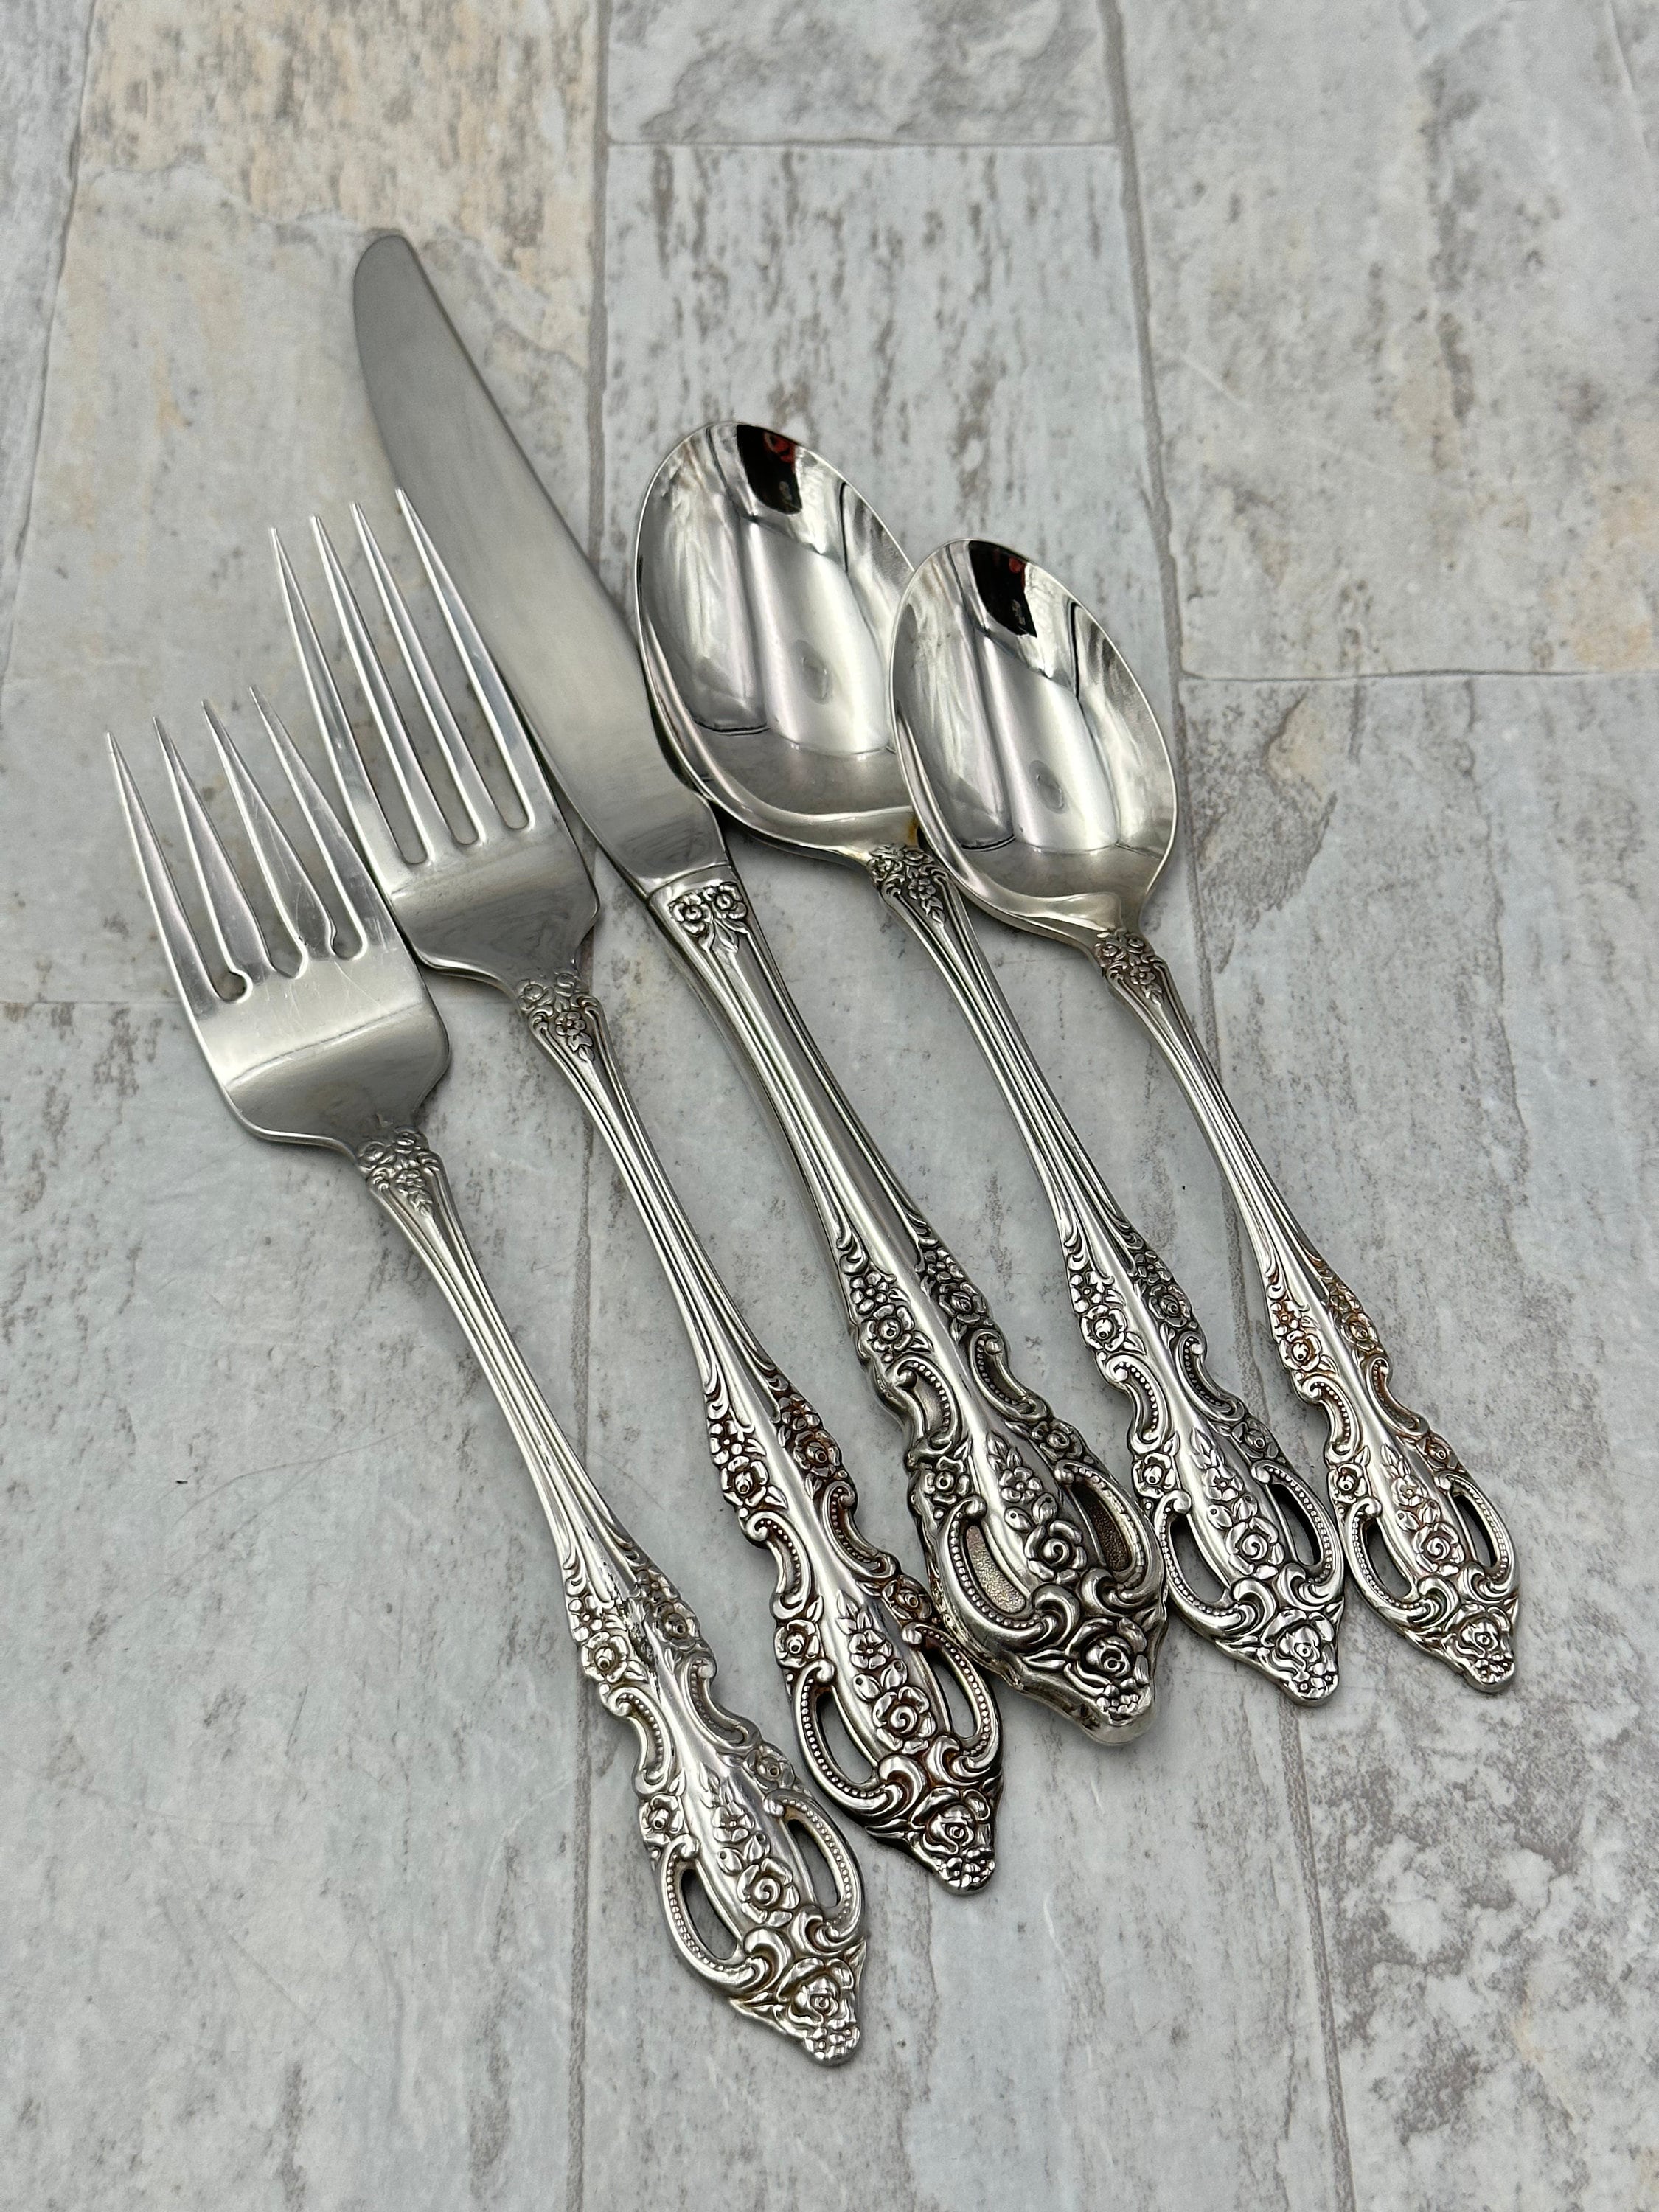 Oneida Lasting Rose Deluxe Stainless Flatware Set, Service for 8 in Storage  Tray, Vintage Silverware Set, Mint Condition, Wedding Gift 